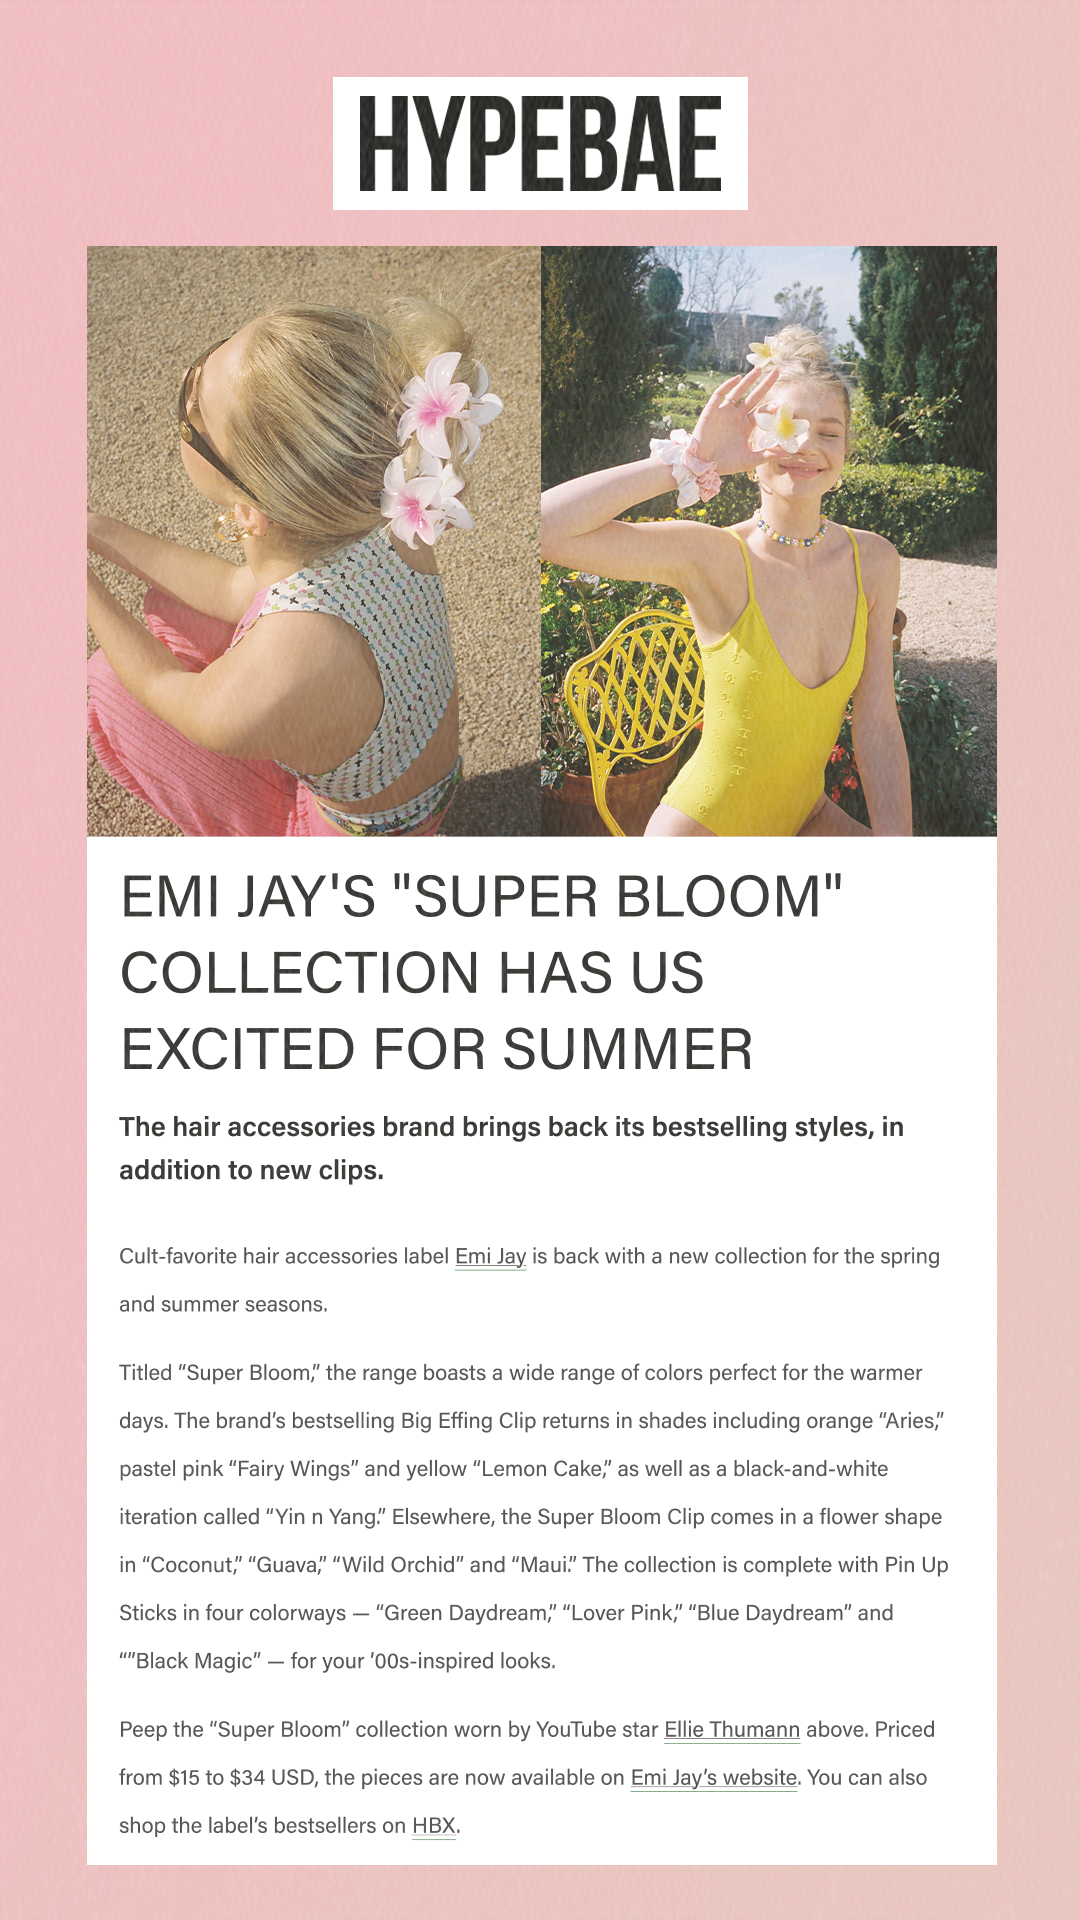 Emi Jay's Super Bloom Collection Has Us Excited for Summer The hair accessories brand brings back its bestselling styles, in addition to new clips. Cult-favorite hair accessories label Emi Jay is back with a new collection for the spring and summer seasons. Titled Super Bloom, the range boasts a wide range of colors perfect for the warmer days. The brand’s bestselling Big Effing Clip returns in shades including orange Aries, pastel pink Fairy Wings and yellow Lemon Cake, as well as a black-and-white iteration called Yin n Yang. Elsewhere, the Super Bloom Clip comes in a flower shape in Coconut, Guava, Wild Orchid and Maui. The collection is complete with Pin Up Sticks in four colorways — Green Daydream, Lover Pink, Blue Daydream and Black Magic — for your 00s-inspired looks. Peep the Super Bloom collection worn by YouTube star Ellie Thumann above. Priced from $15 to $34 USD, the pieces are now available on Emi Jay’s website. You can also shop the labels bestsellers on HBX.